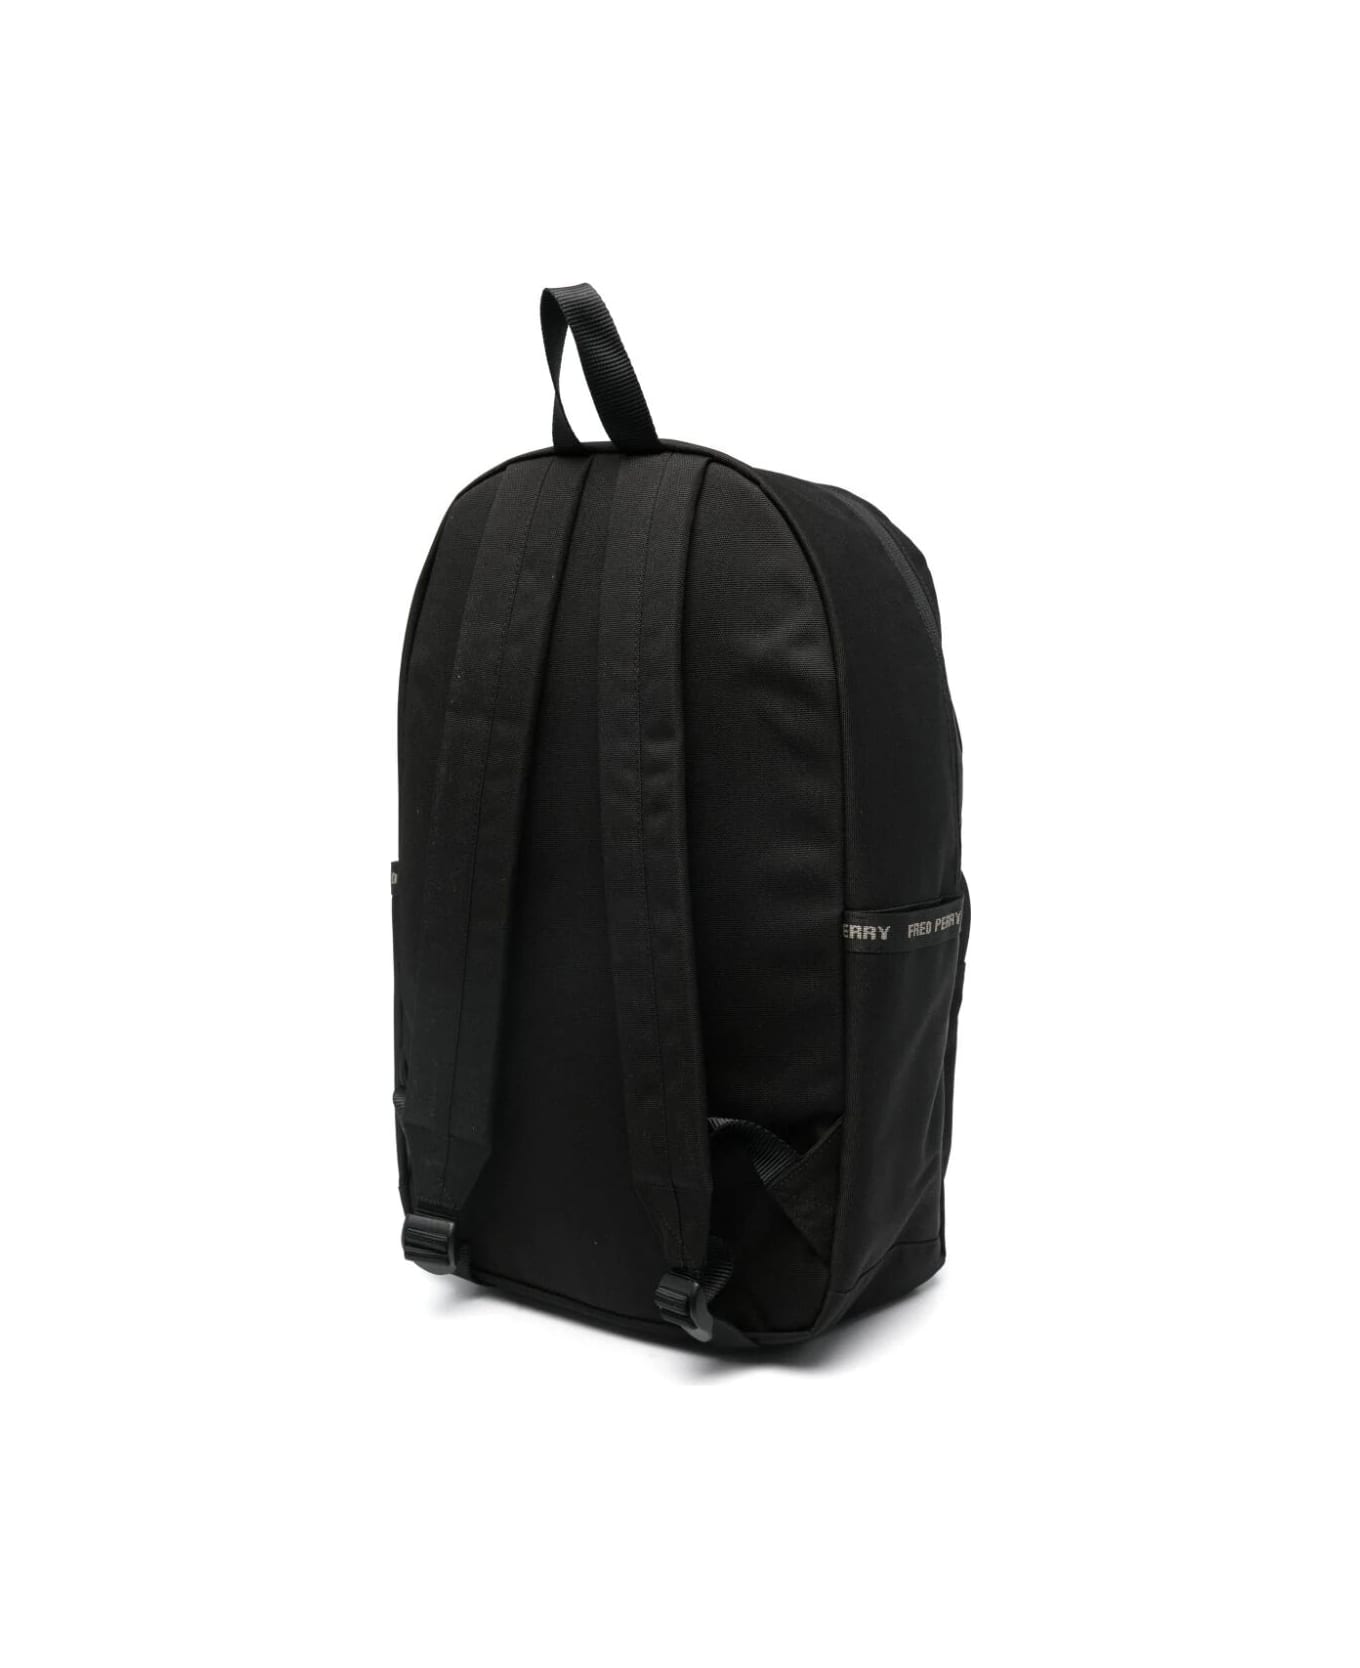 Fred Perry Fp Taped Backpack - Black Warm Grey